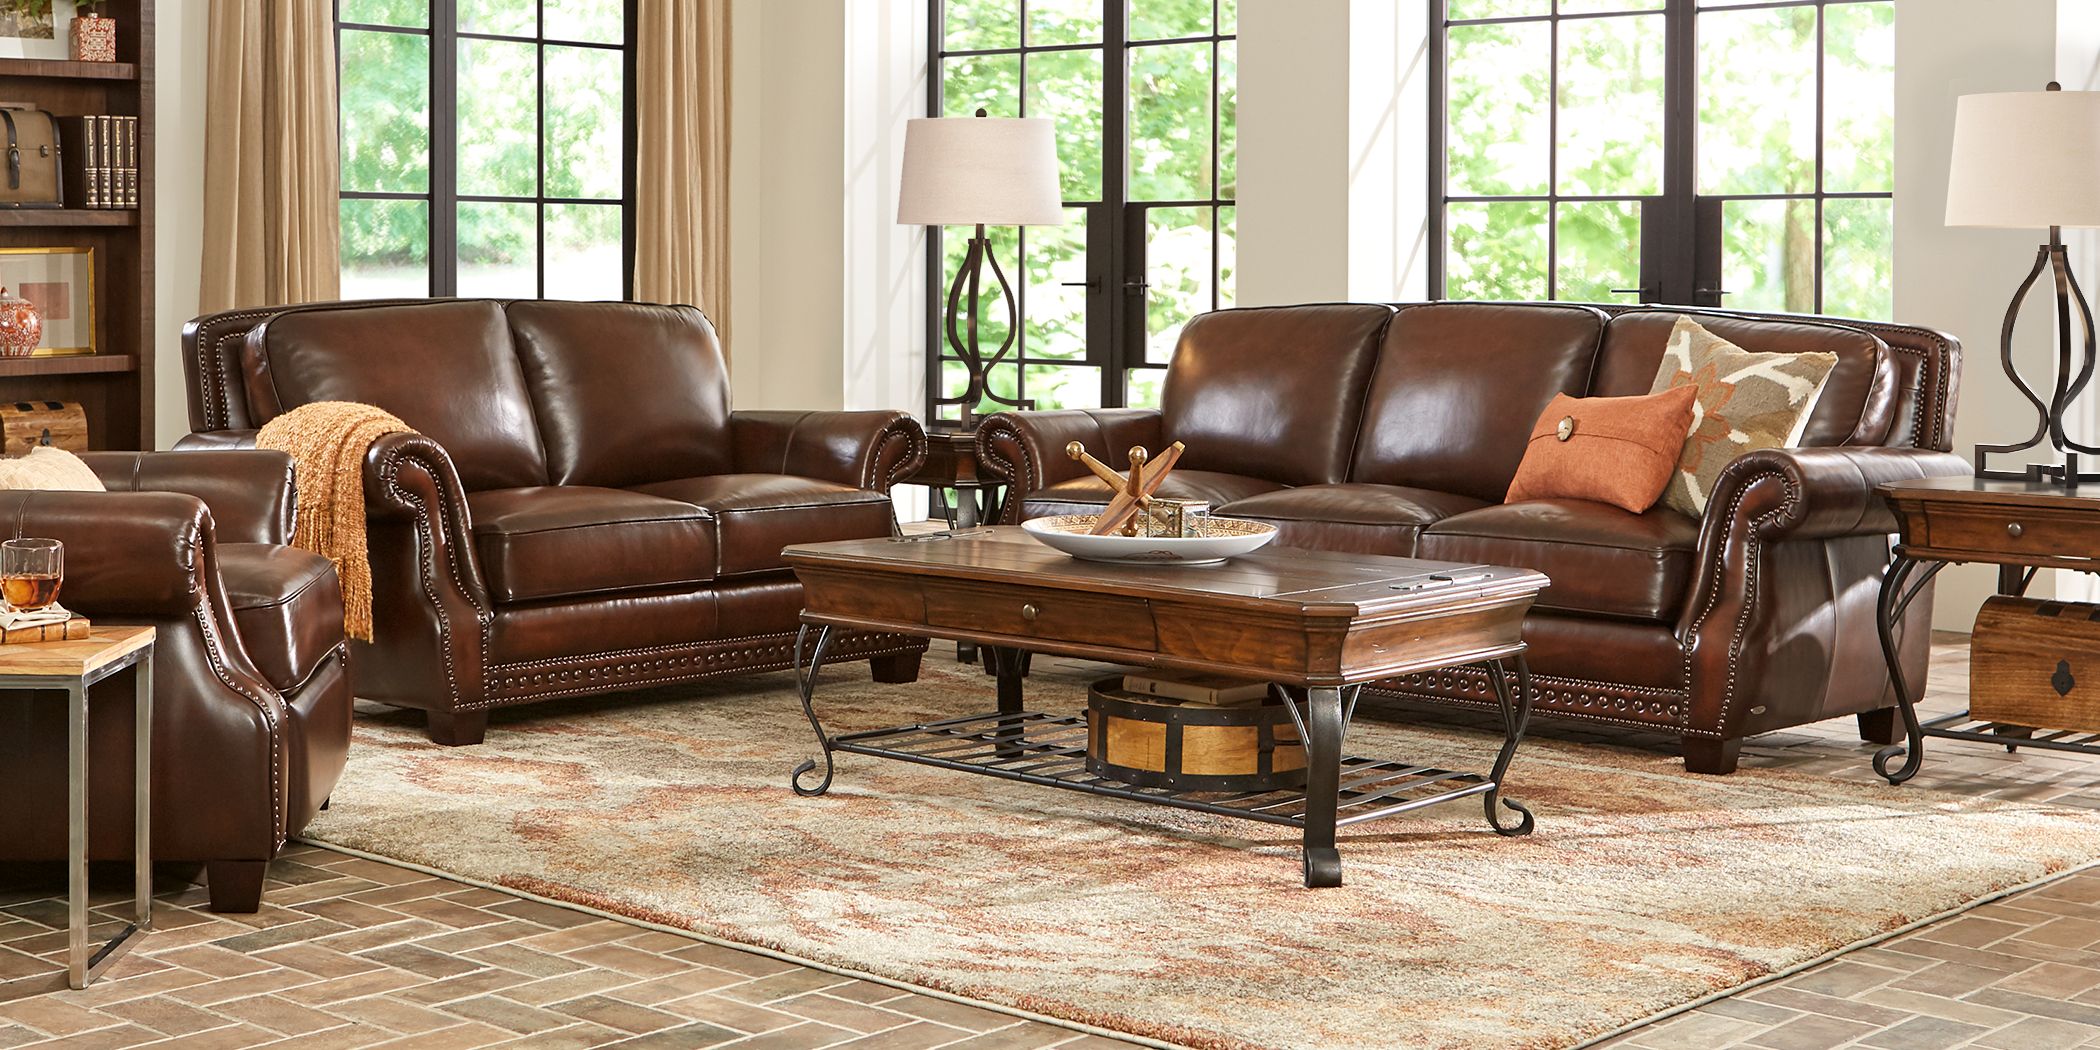 Calvano Brown Leather 5 Pc Living Room, Cindy Crawford Home Calvano Brown Leather 3 Pc Living Room